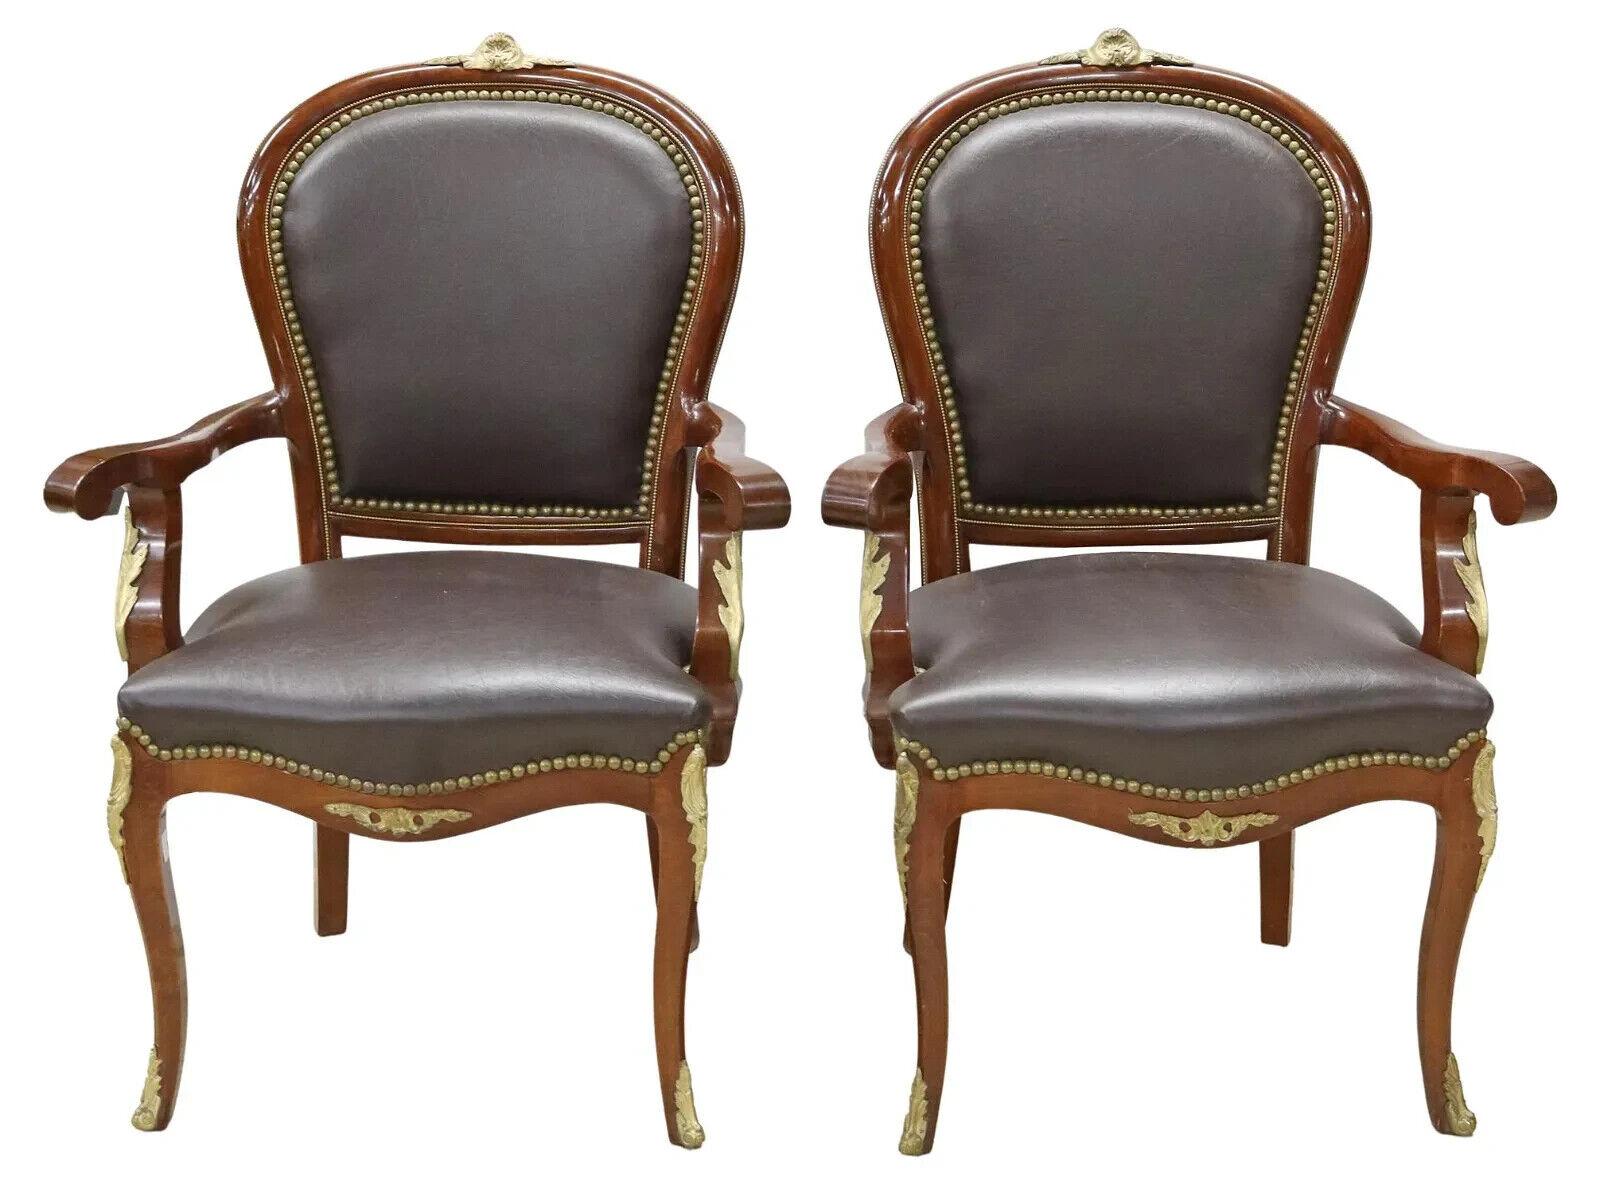 Handsome Fauteuils, (2) Louis XV Style Black, Upholstered, Crest, Nailhead Trim, Vintage, 20th Century!  See other matching desk chair!!

Pair of Louis XV style armchairs, 20th c., frame in a mahogany finish, having shell crest, black upholstery,